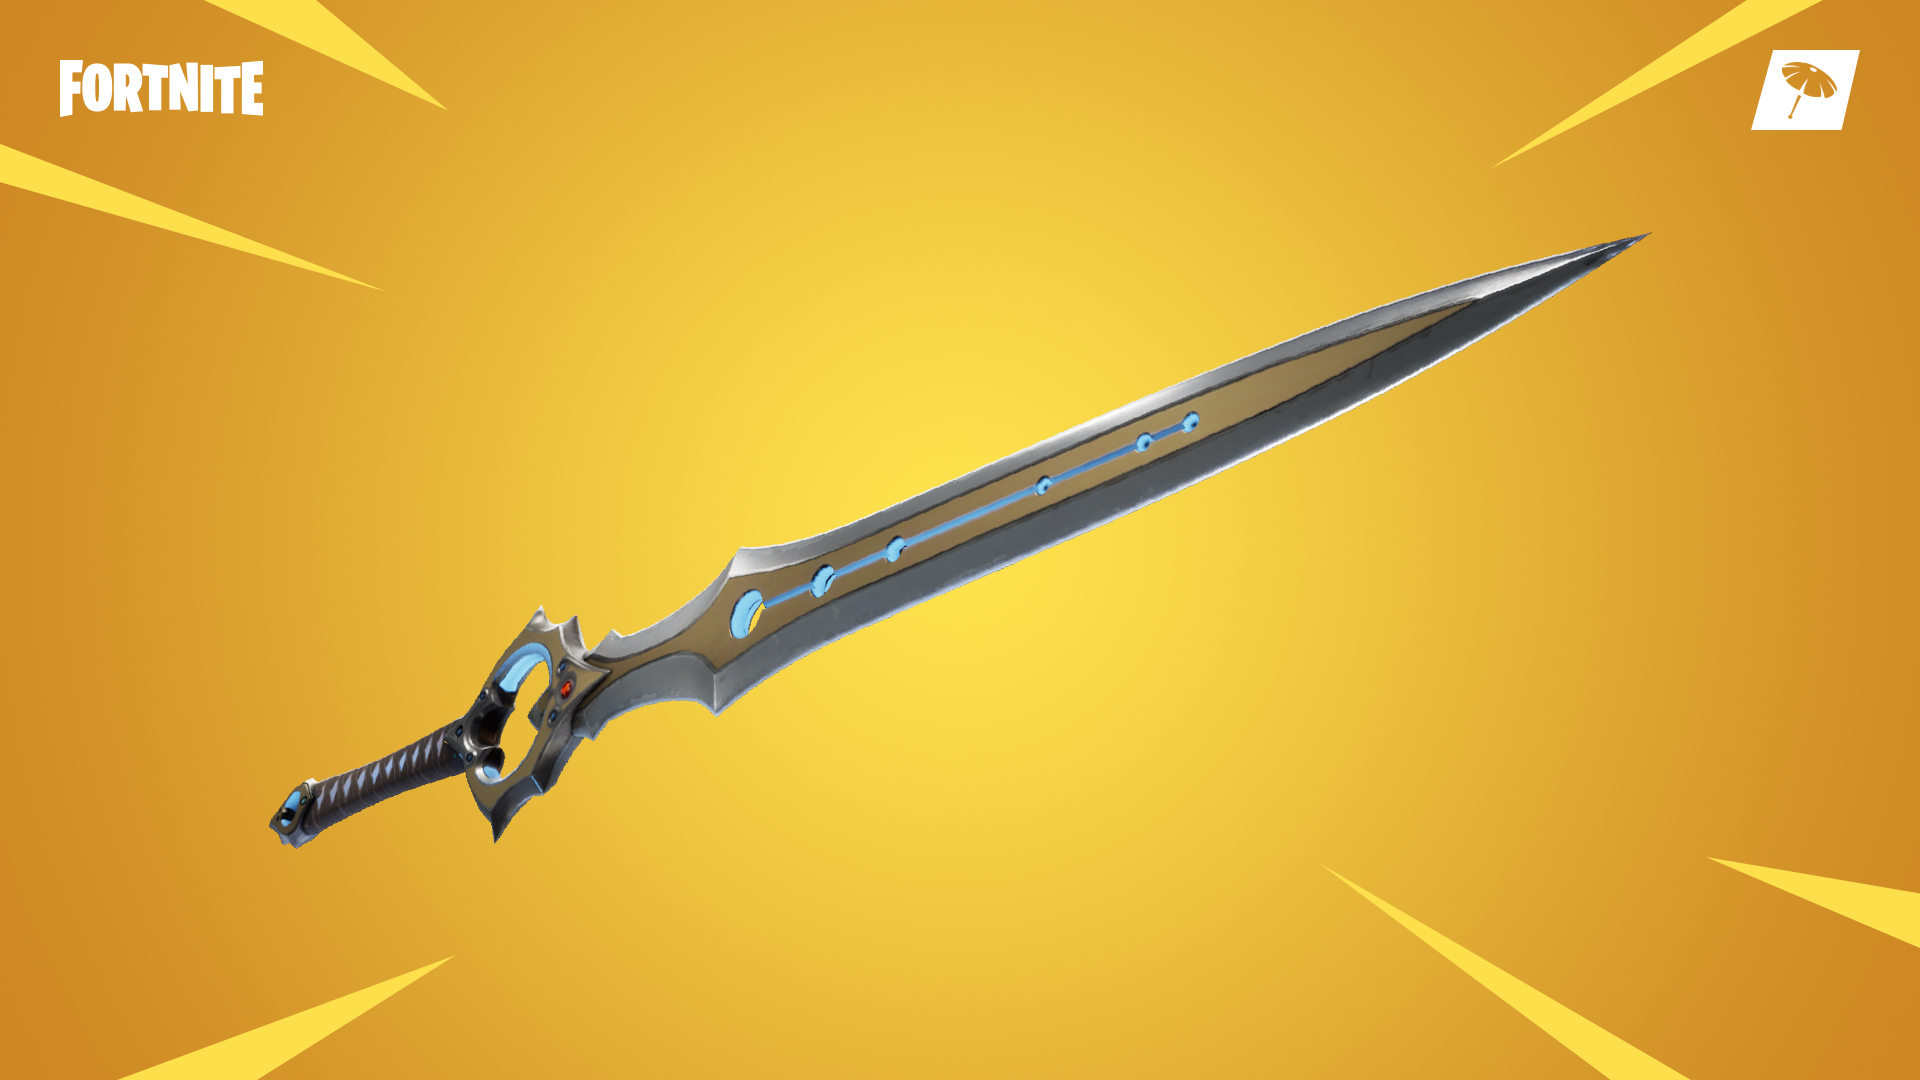 Fortnite's Infinity Blade is a mythical sword that kills in one